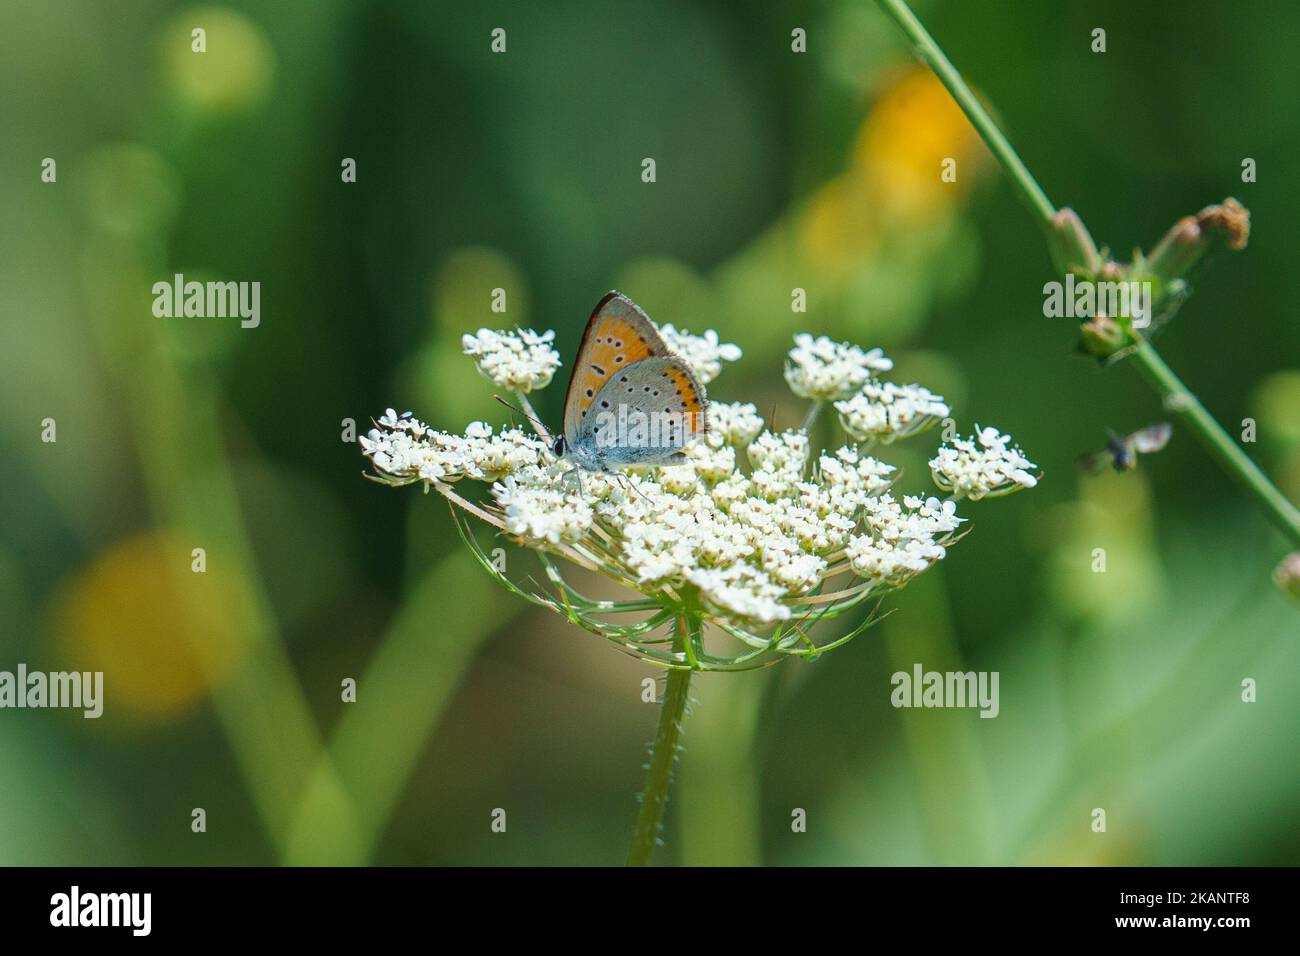 A beautiful large copper butterfly (Lycaena dispar) resting on a flower on the blurred background Stock Photo